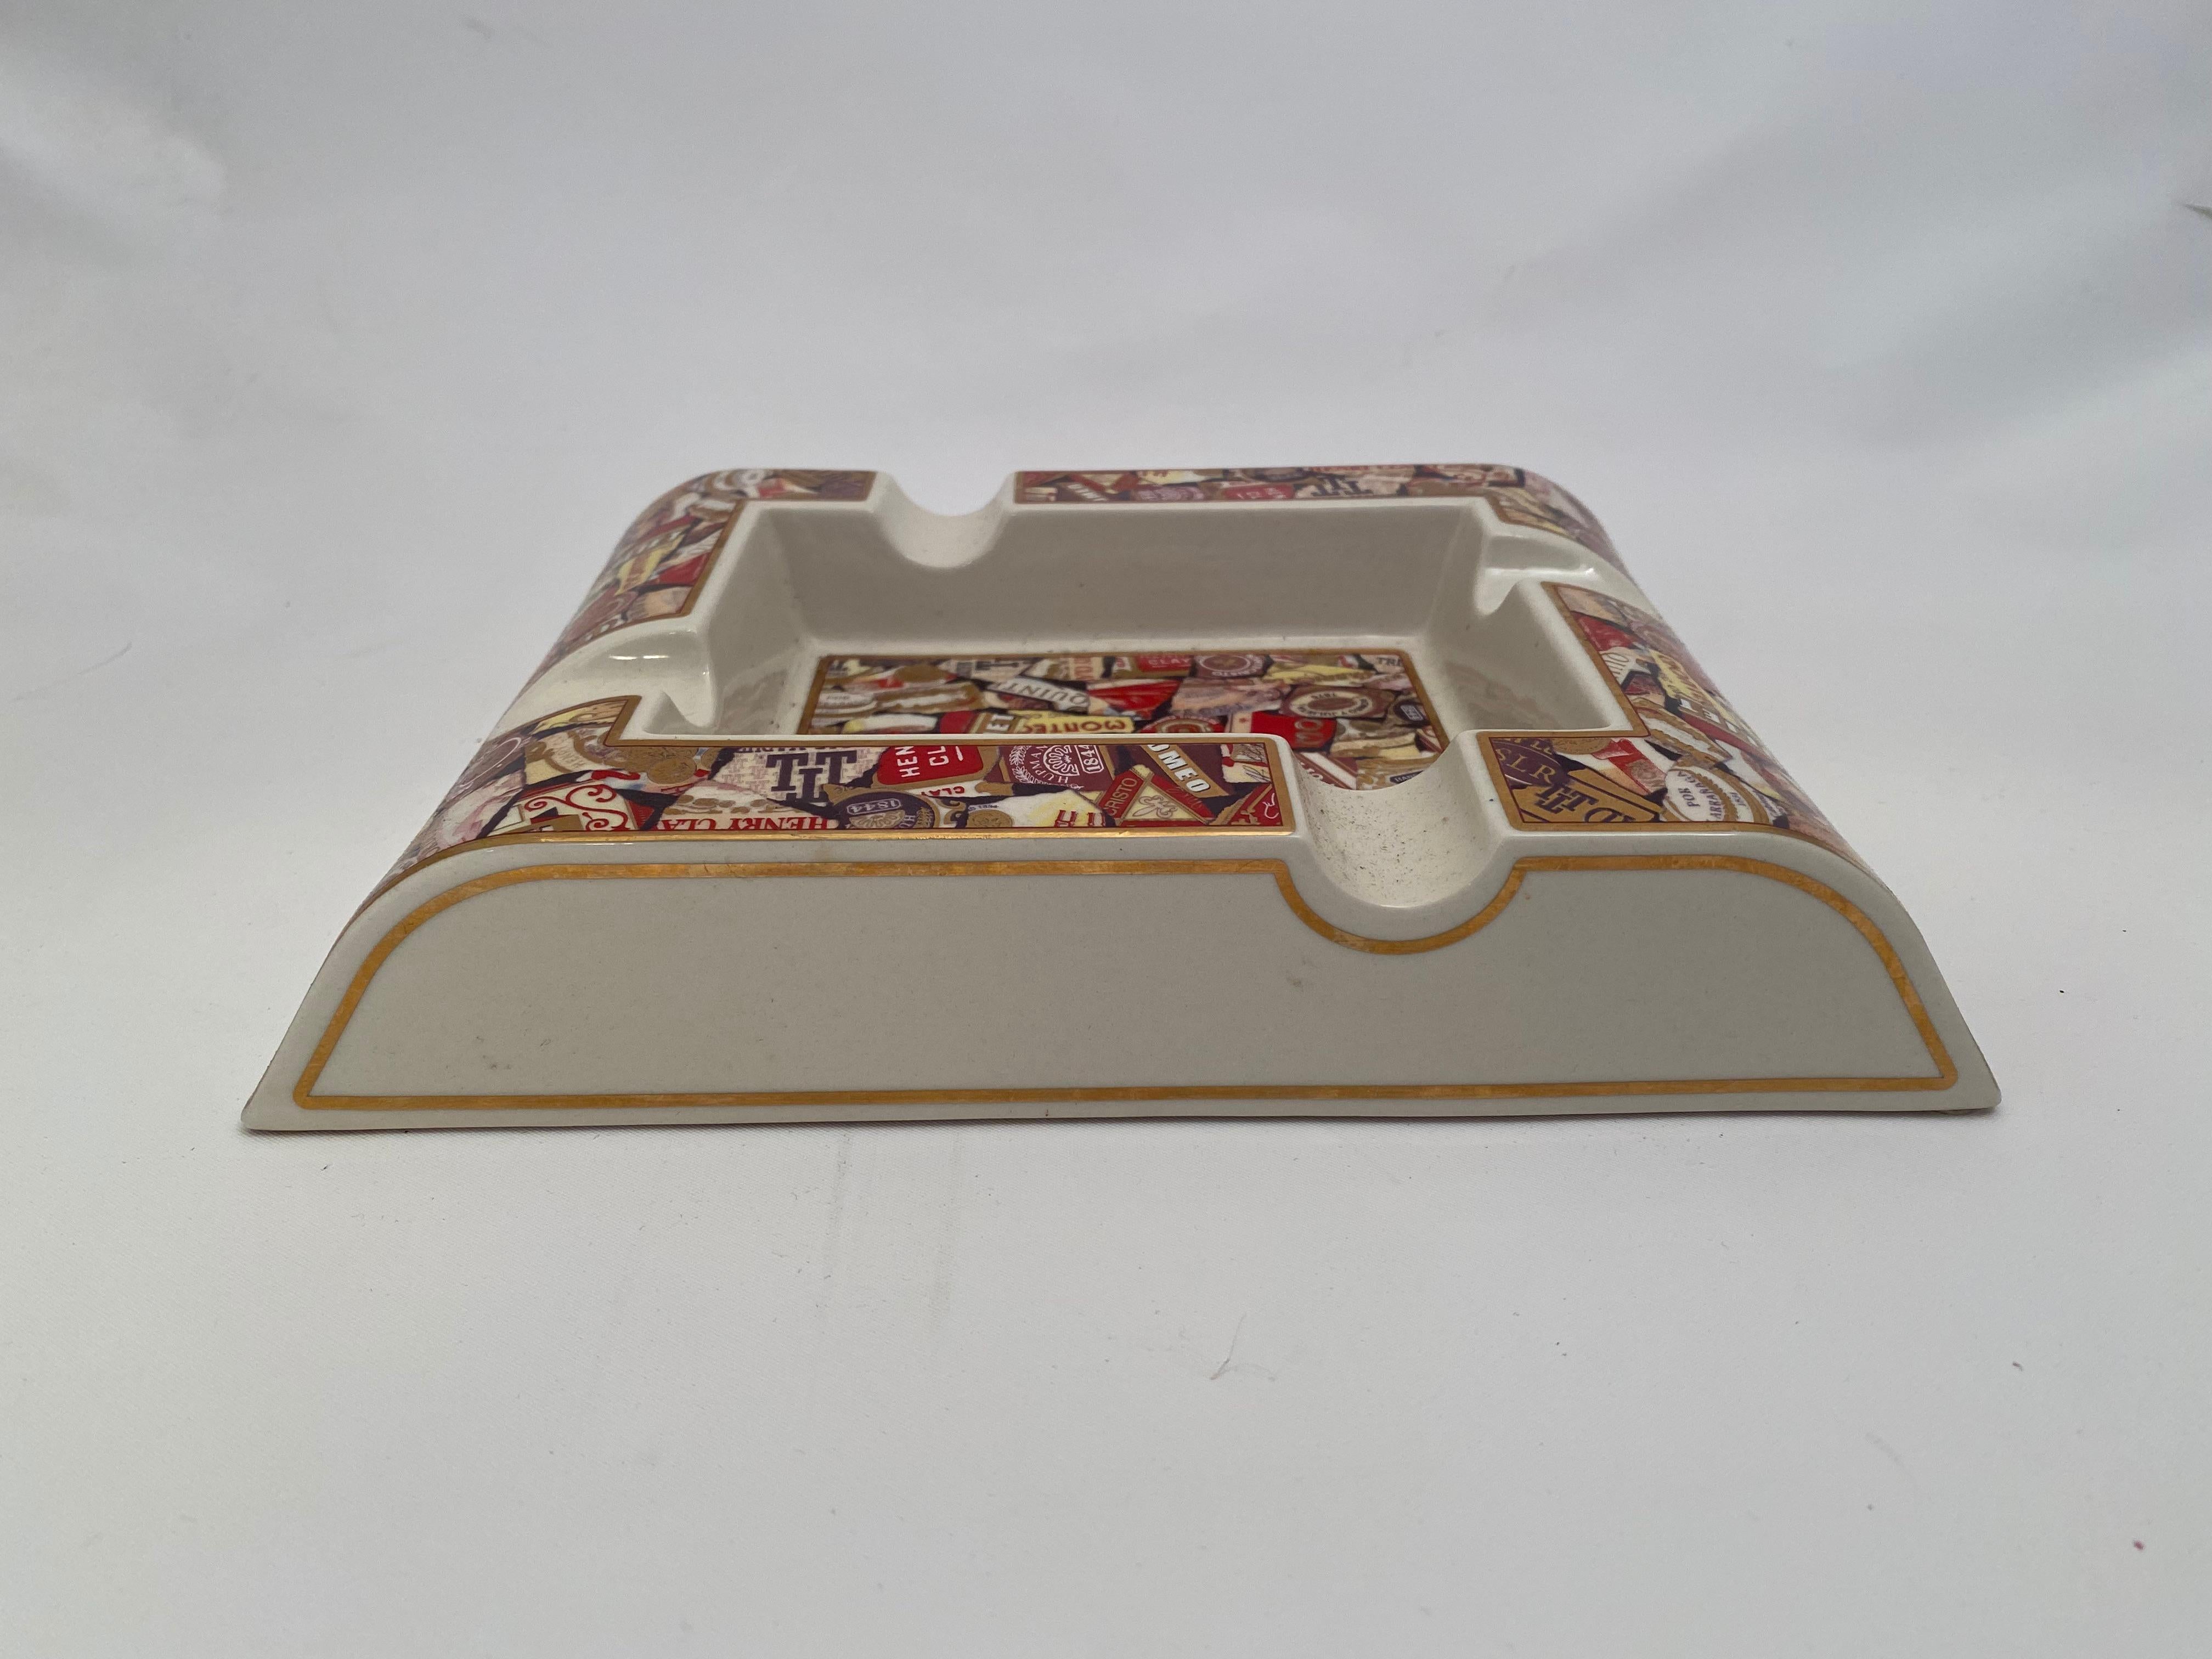 Large and commodious screen printed cigar band cigar ashtray. Gold leaf banding detail with a wonderful collage of numerous famous cigar brand bands. 

Very good condition with no visible chips, cracks, hairlines, stains or restorations. Porcelain